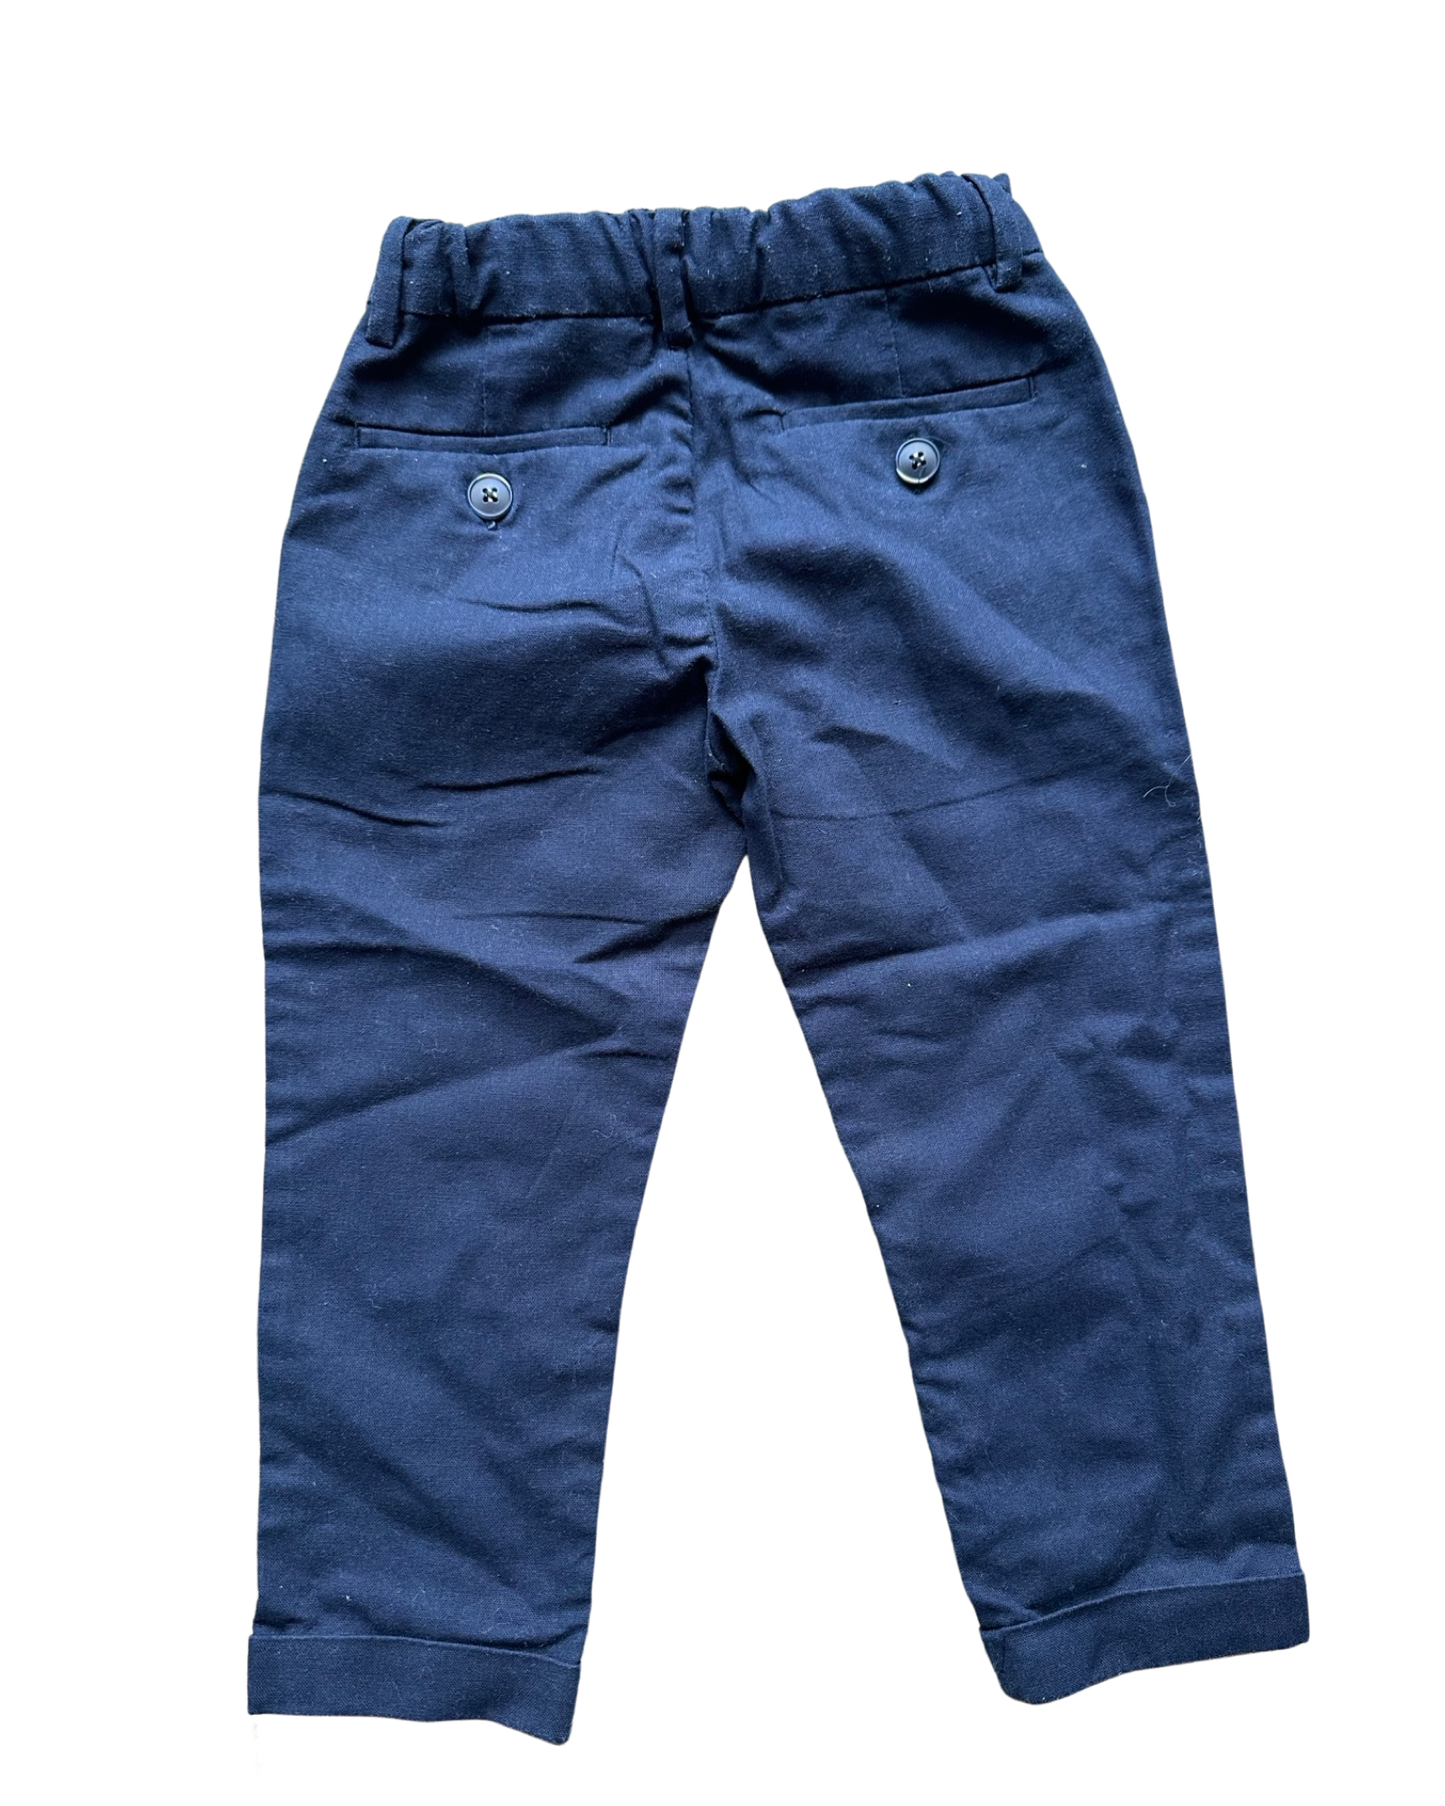 Mayoral navy chino trousers (size 18-24mths)